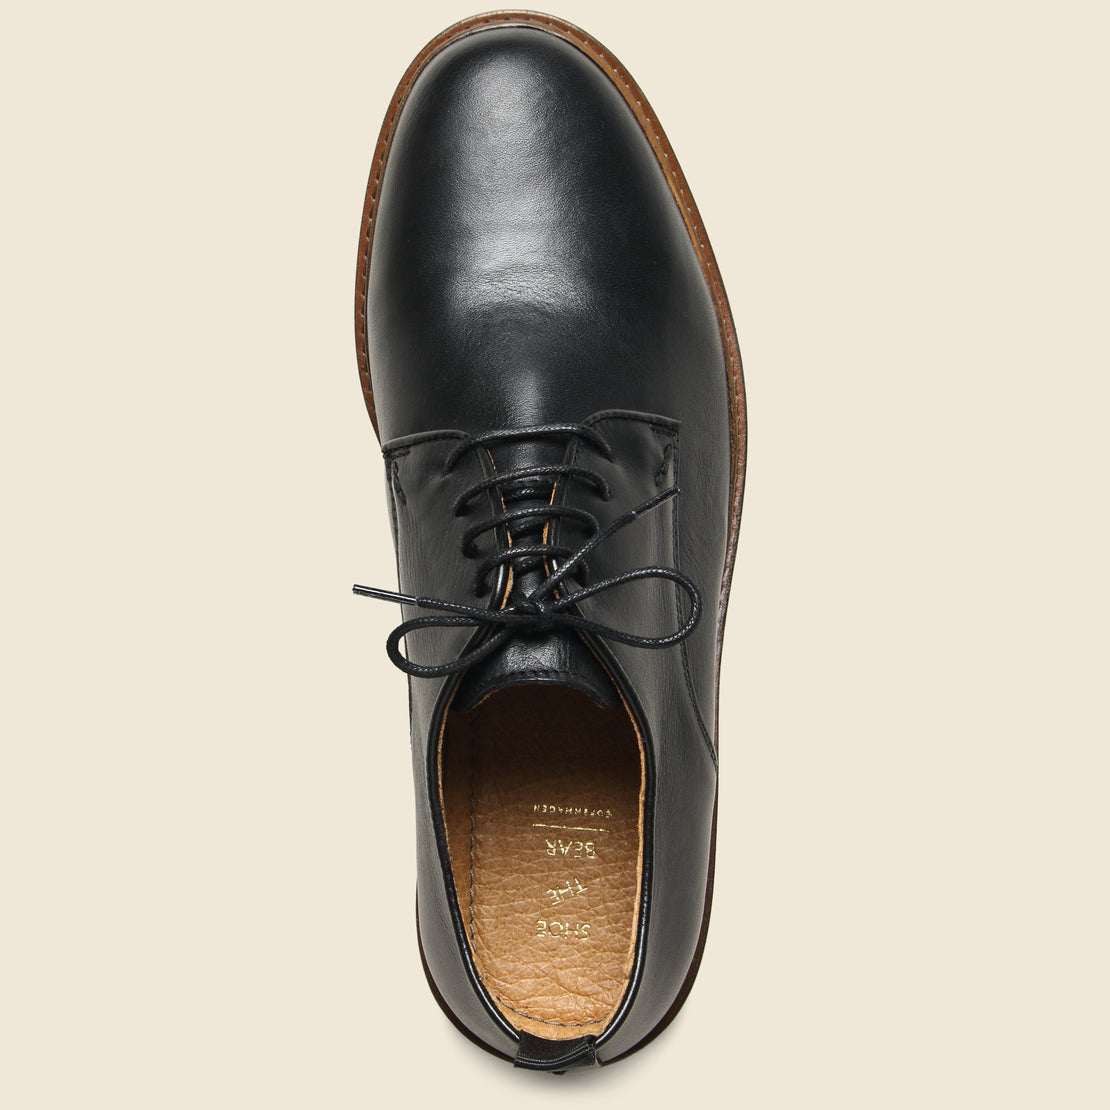 Nate Leather Oxford - Black - Shoe the Bear - STAG Provisions - Shoes - Oxfords